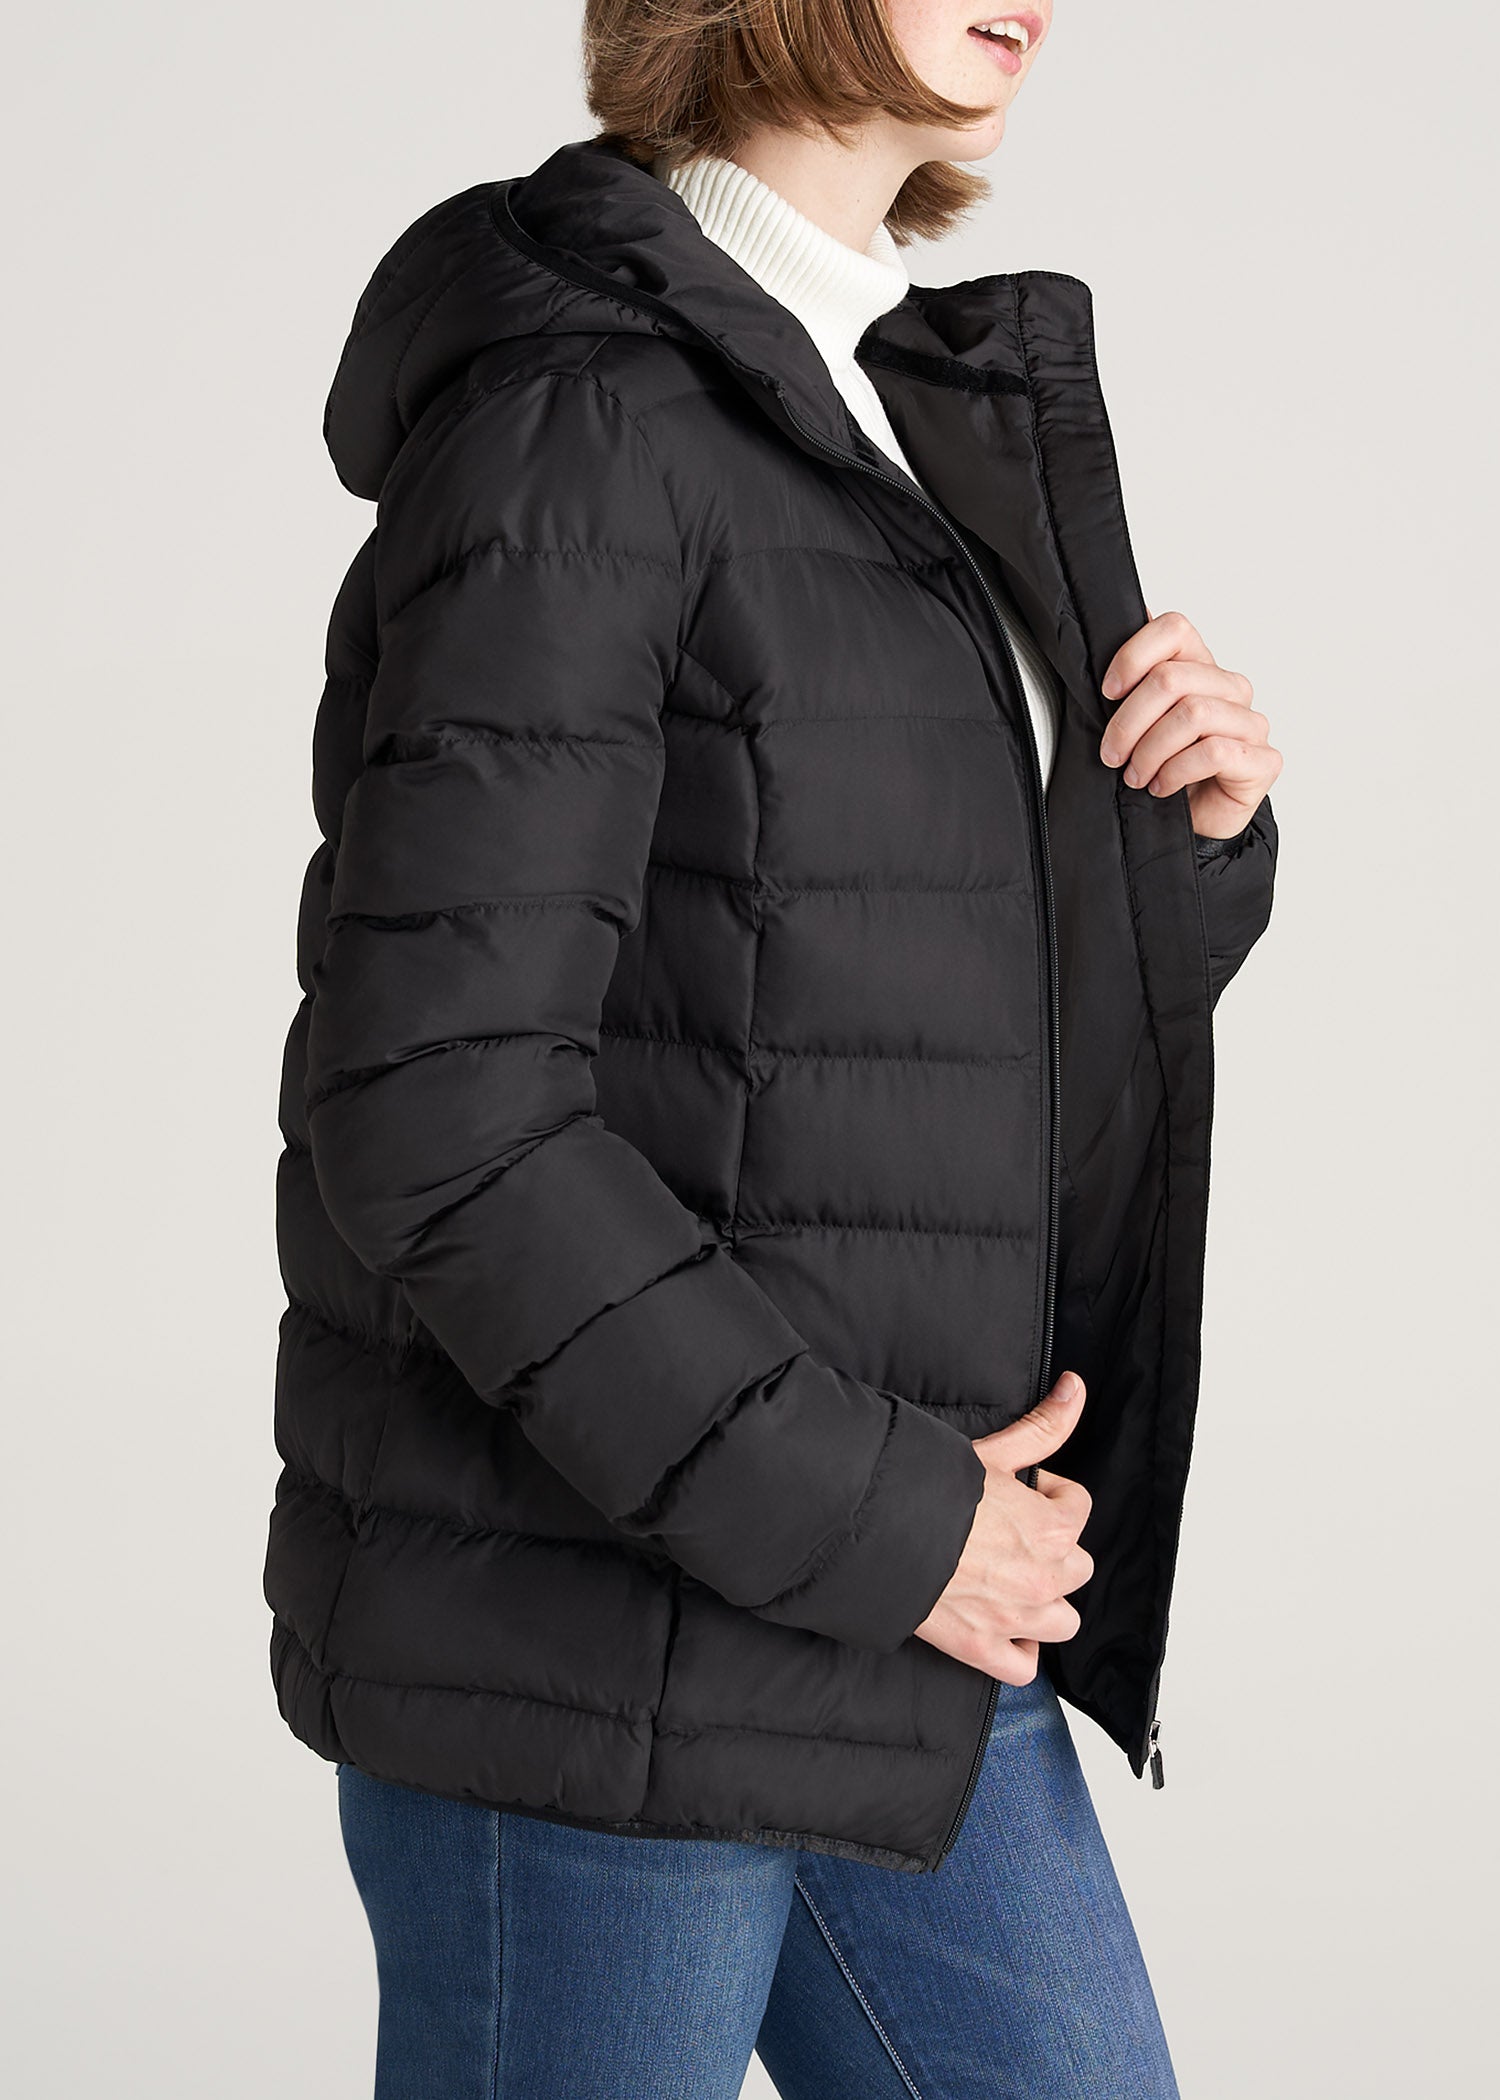 Women Long Quilted Coat Hooded Maxi Length Long Sleeve Puffer Jacket Padded  Coat Winter Outerwear at Amazon Women's Coats Shop